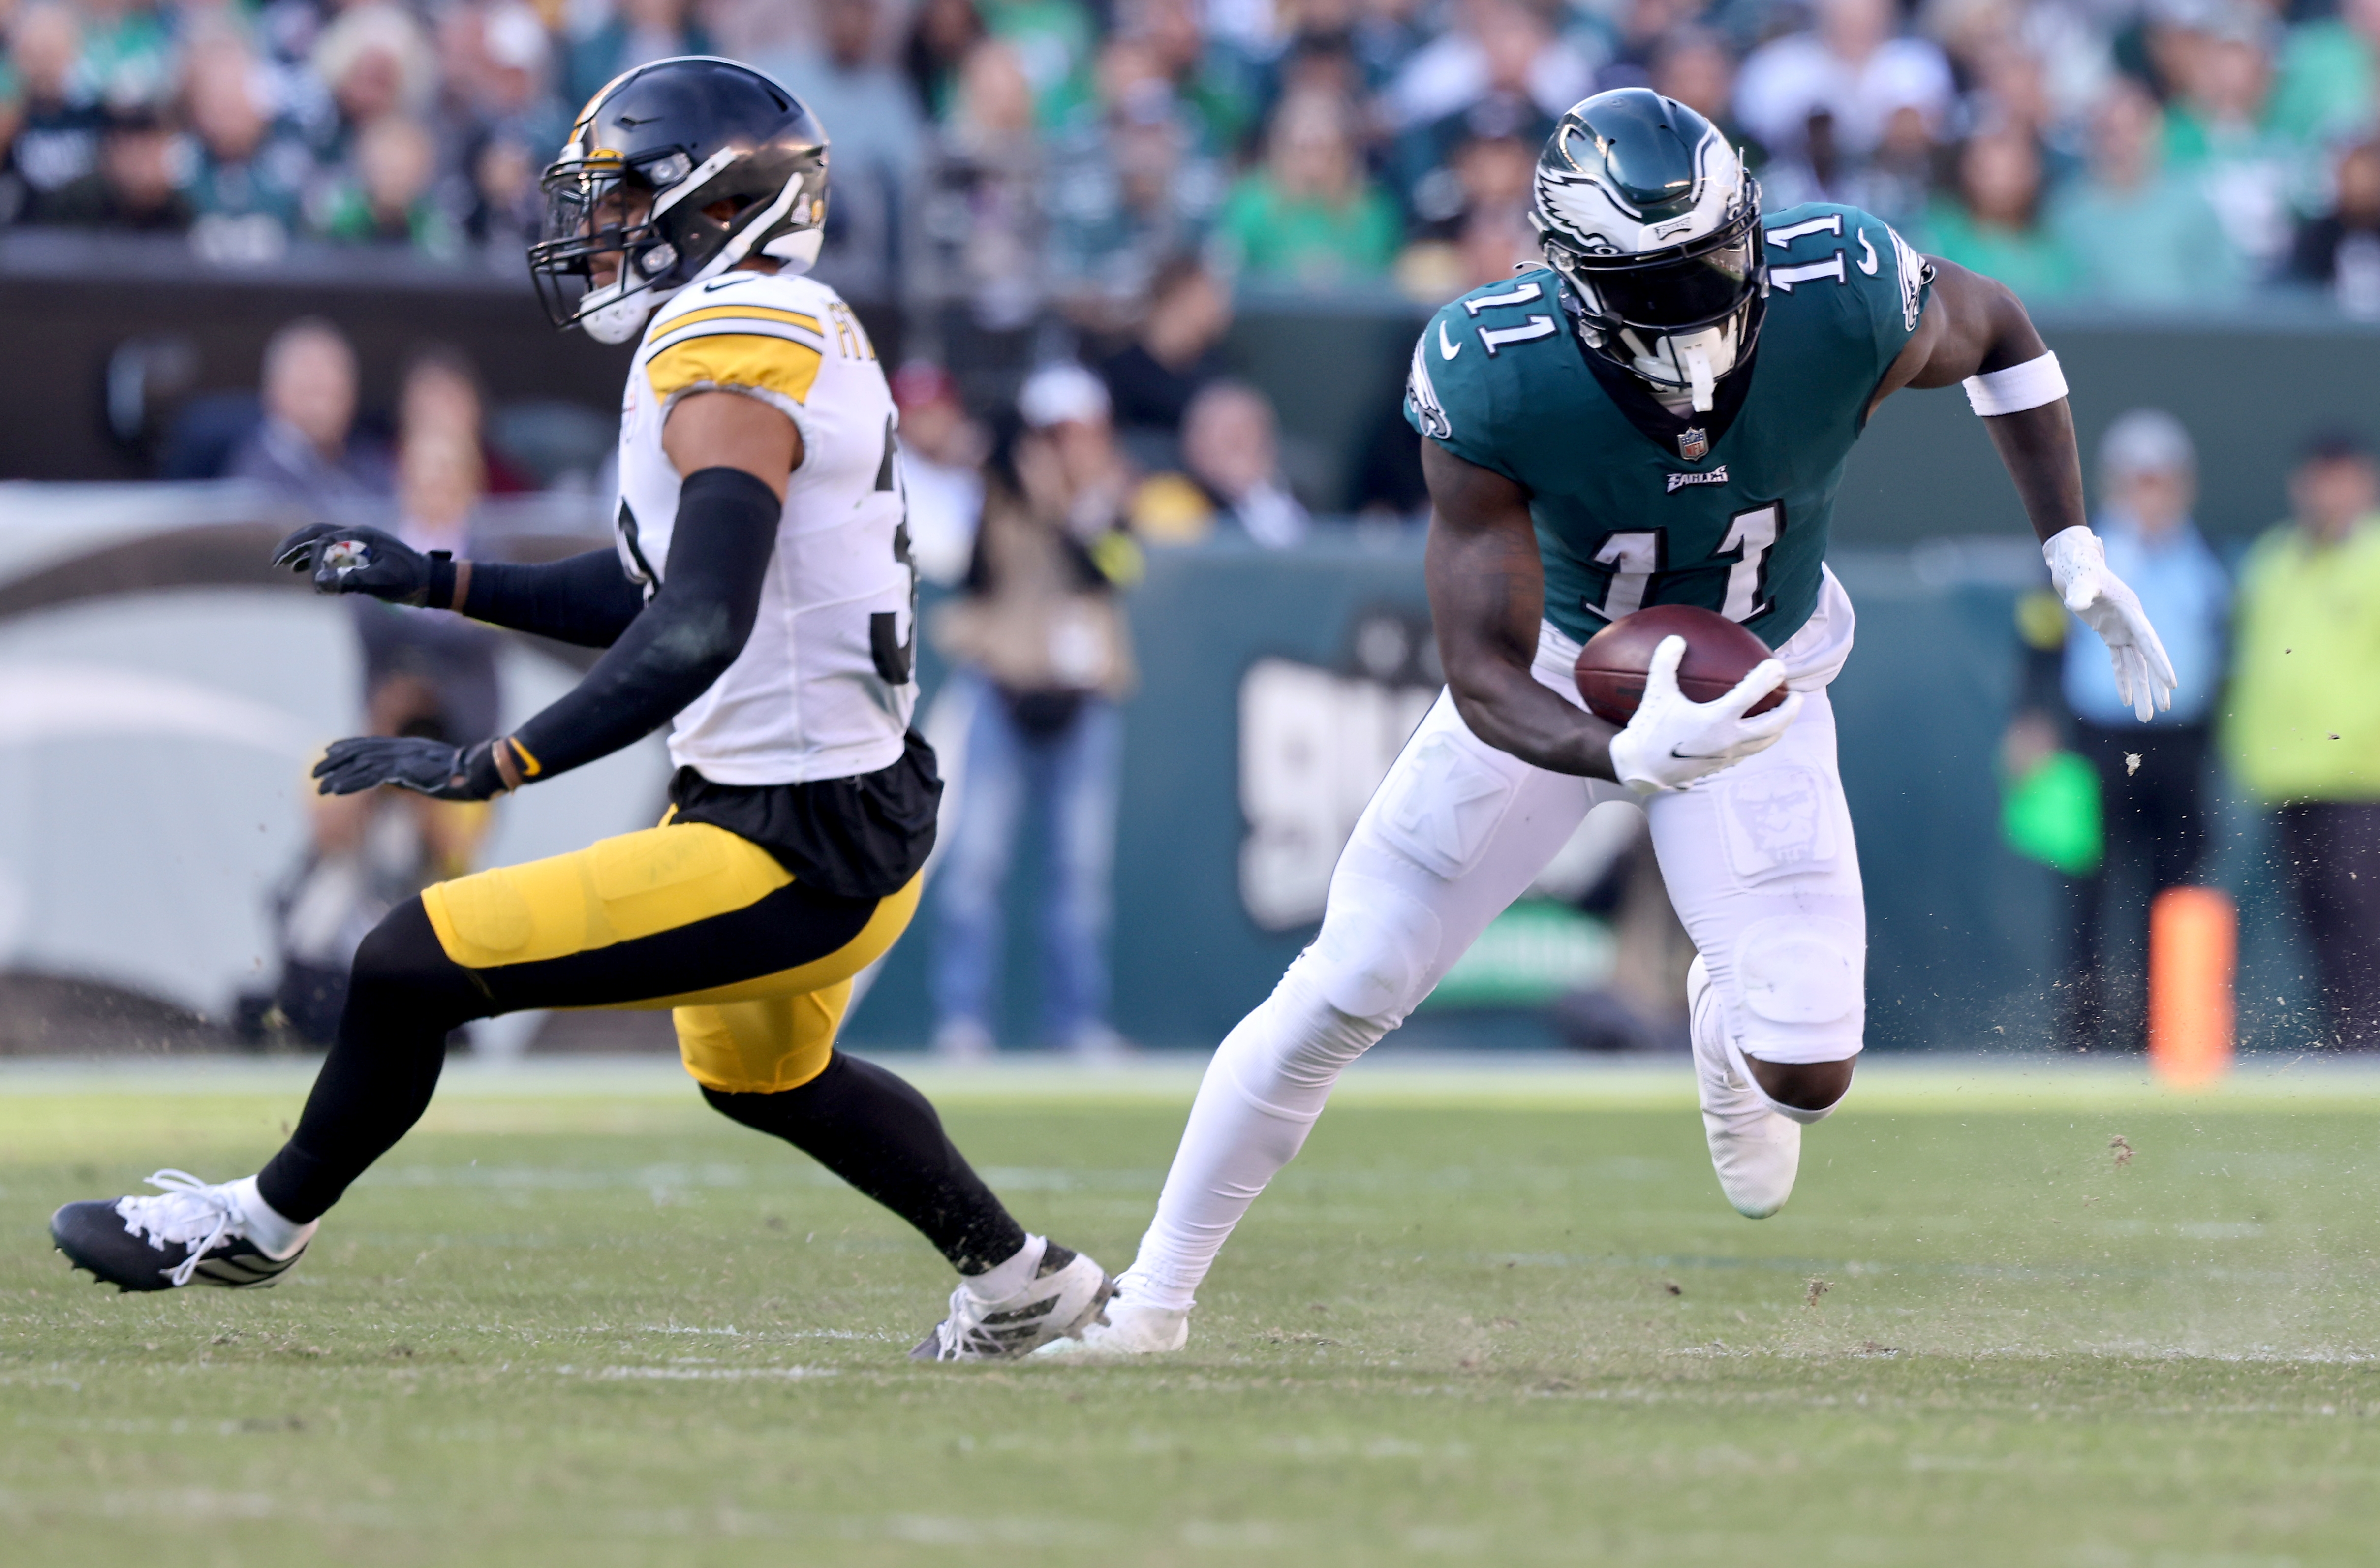 Eagles vs. Steelers: Twitter reacts to A.J. Brown's 3 first half TD's